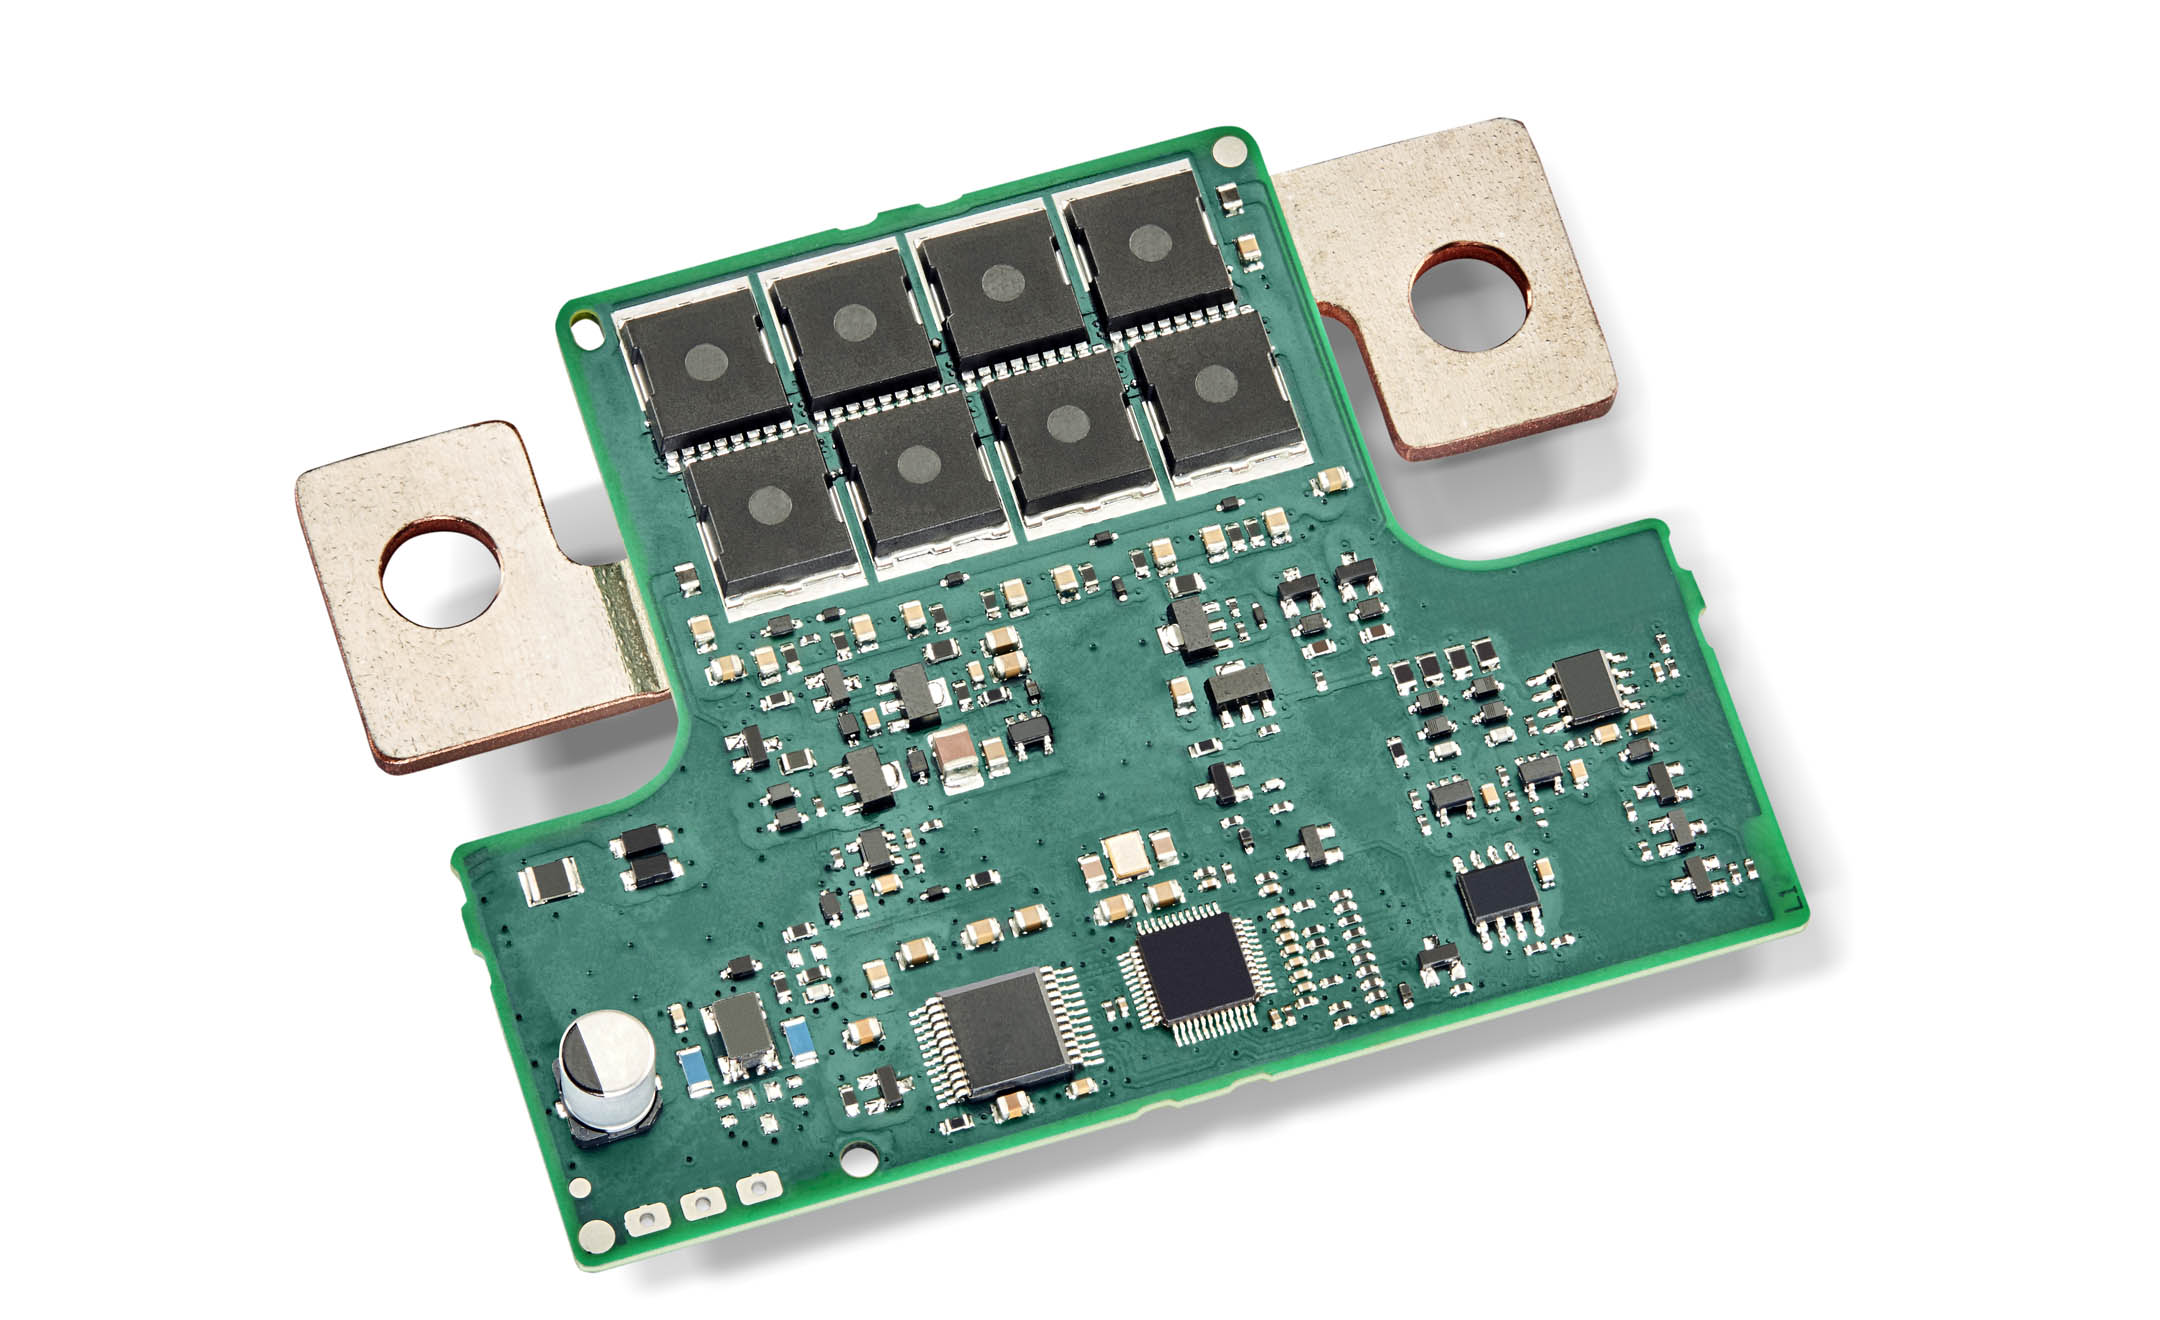 Eberspaecher Develops intelligent semiconductor switch for autonomous driving Levels 3 to 5